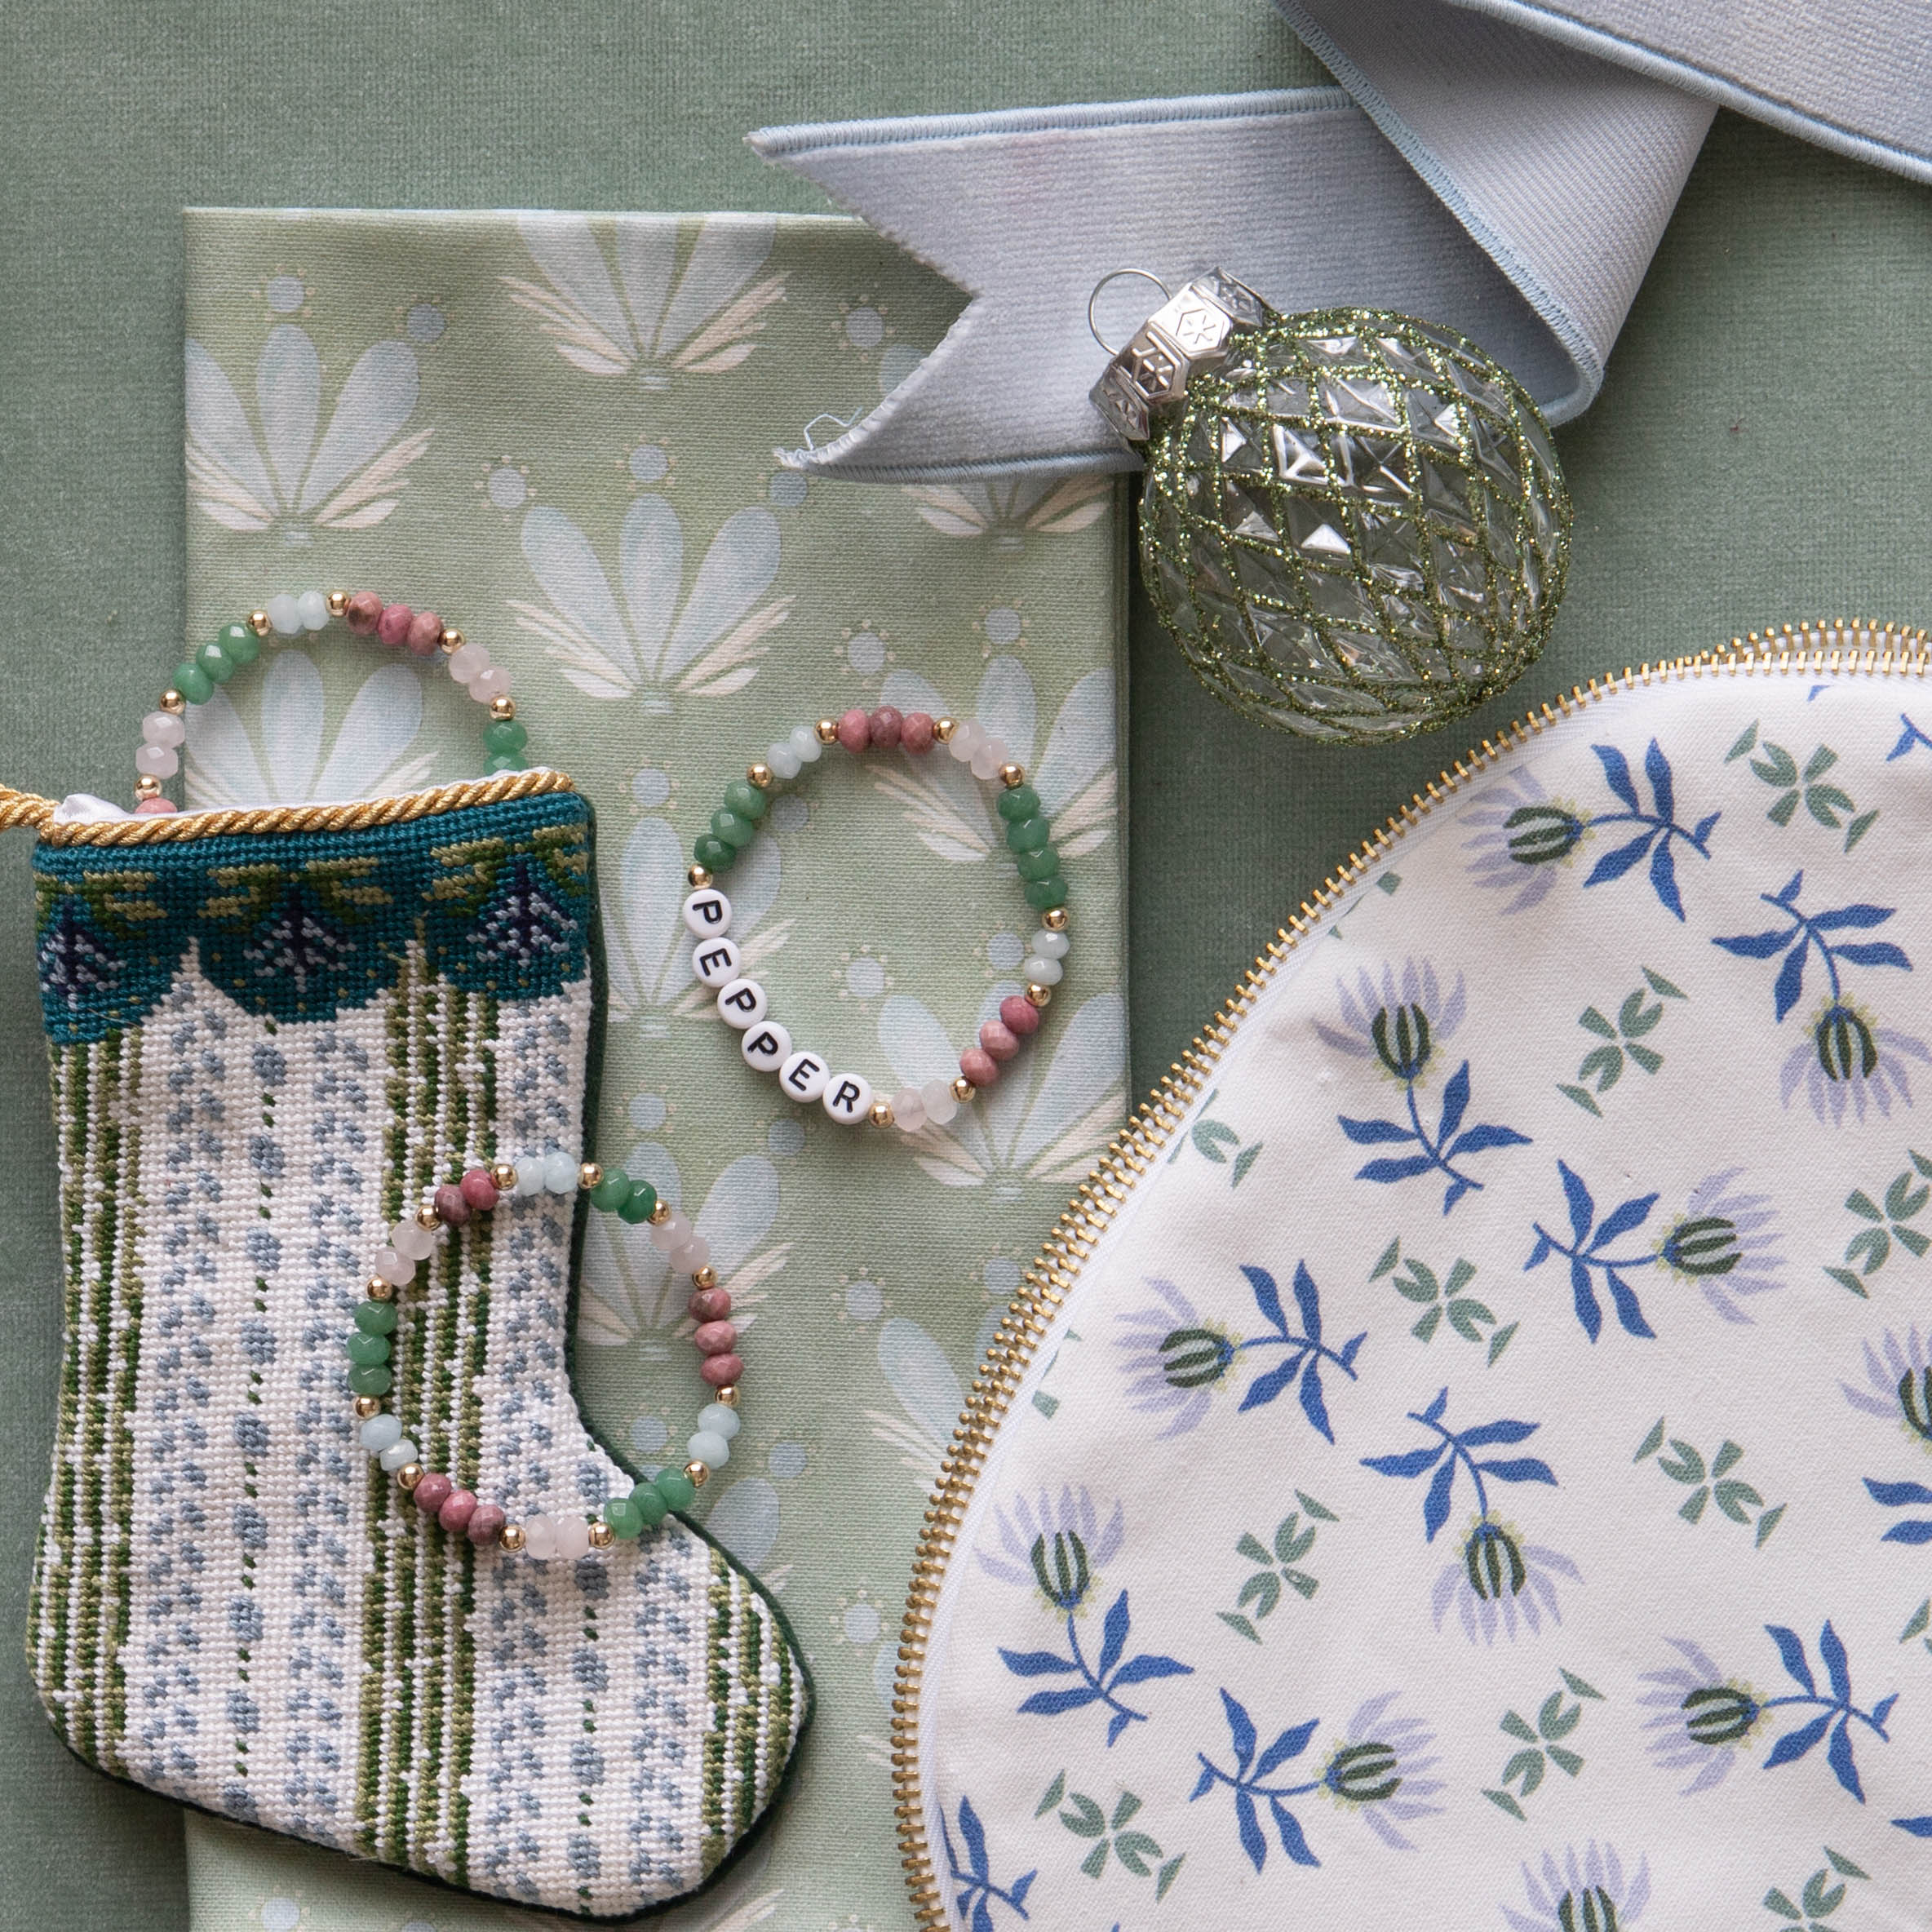 Blue and green floral drop repeat napkin styled with colorful beaded bracelet and blue and green striped stocking next to a blue and green patterned pouch